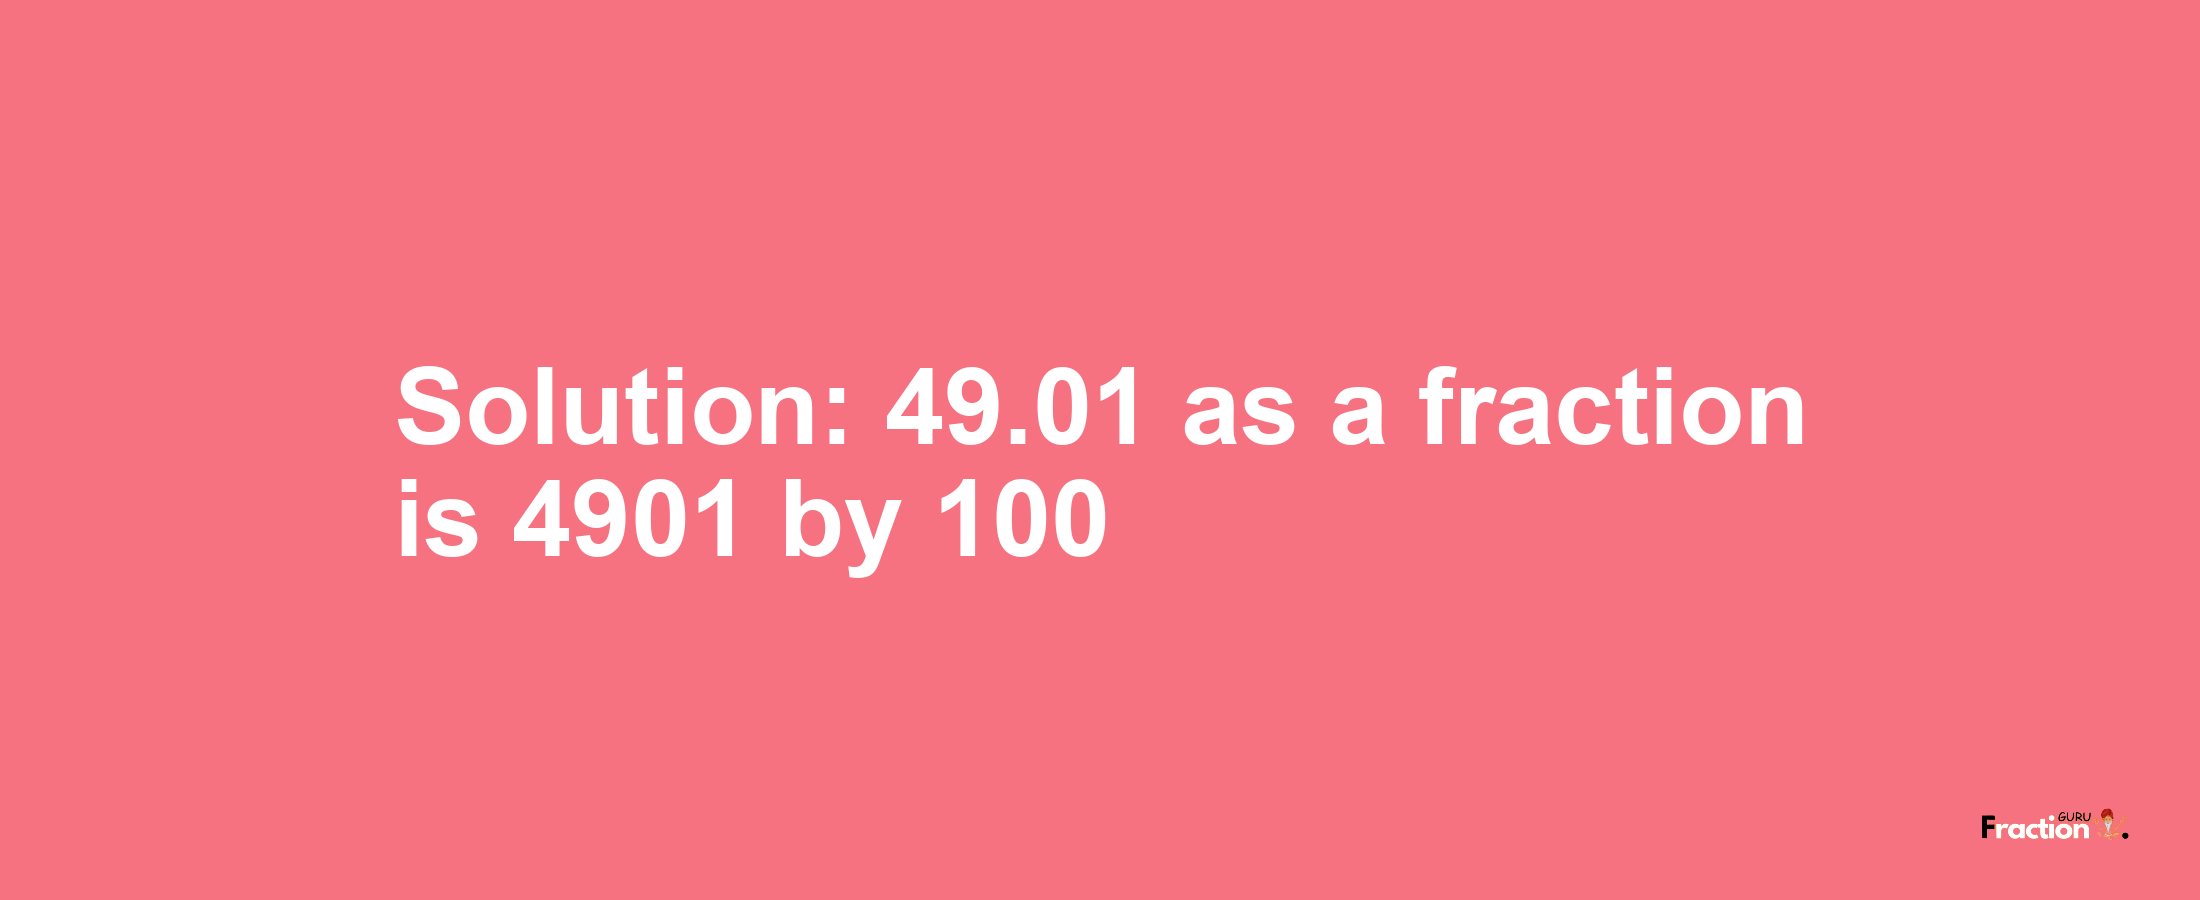 Solution:49.01 as a fraction is 4901/100